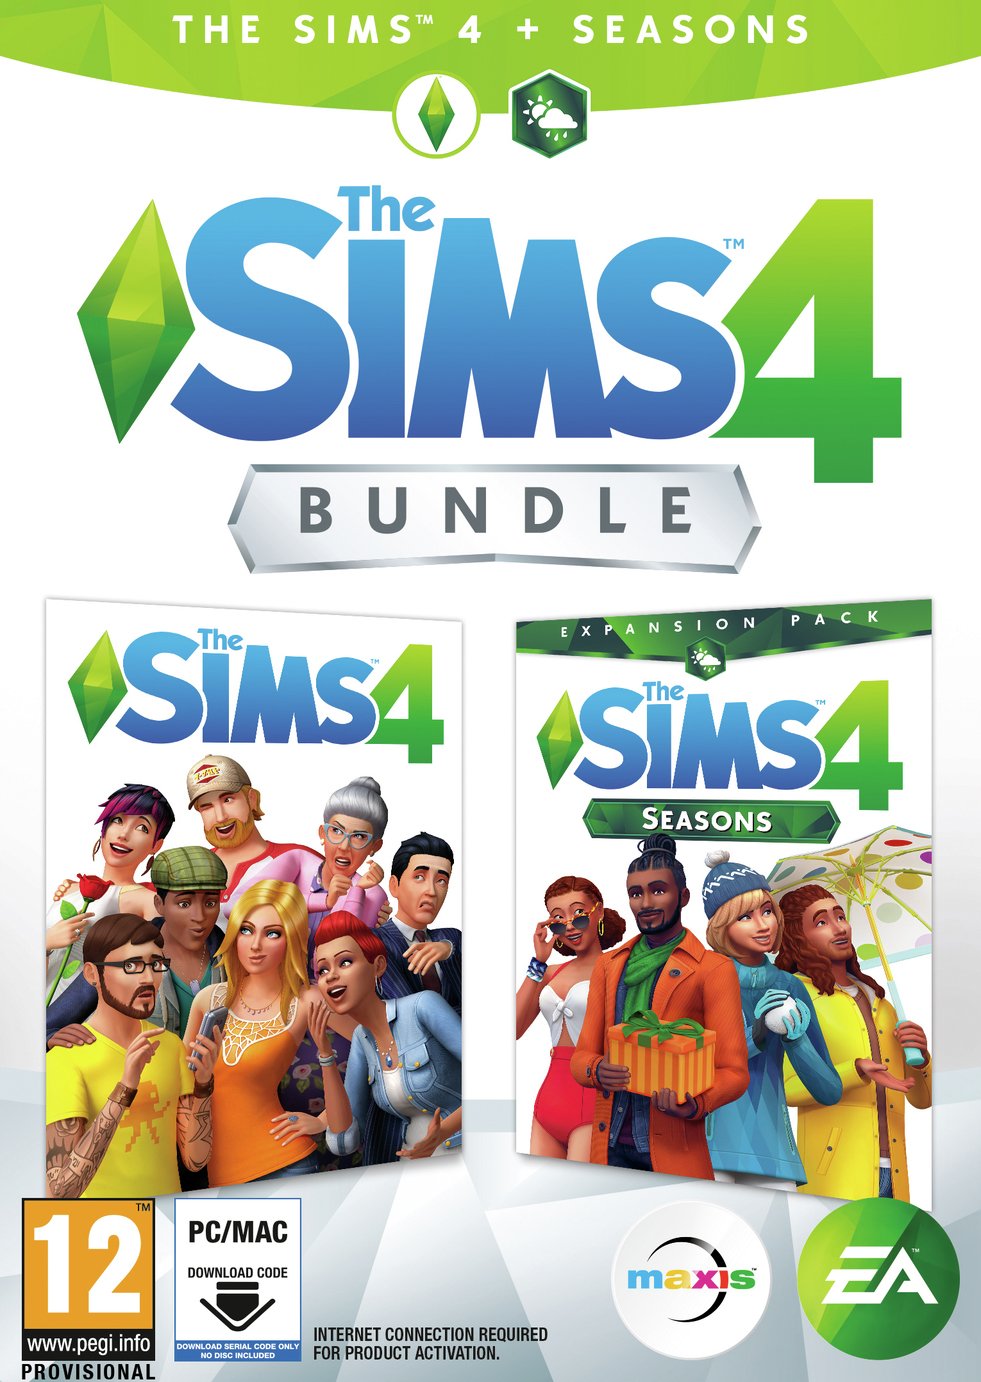 The Sims 4 and Seasons Expansion Bundle PC Game review